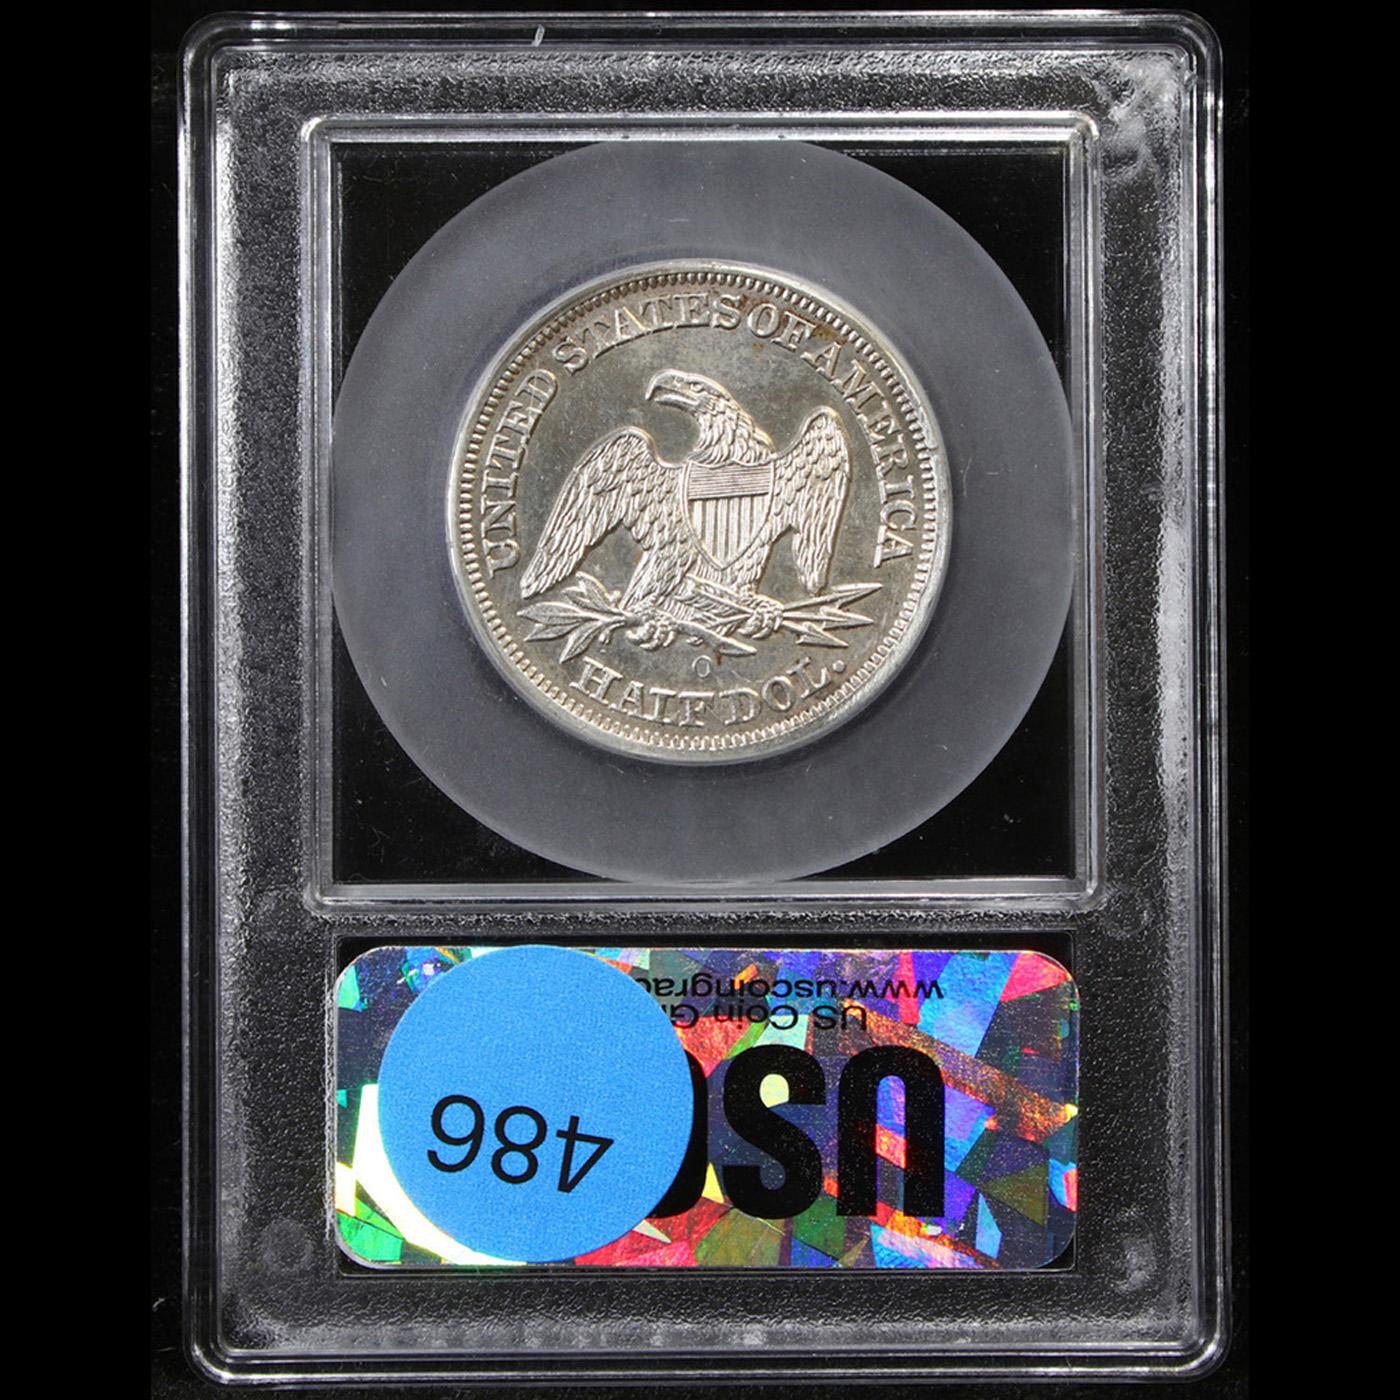 ***Auction Highlight*** 1851-o Seated Half Dollar 50c Graded Select+ Unc By USCG (fc)